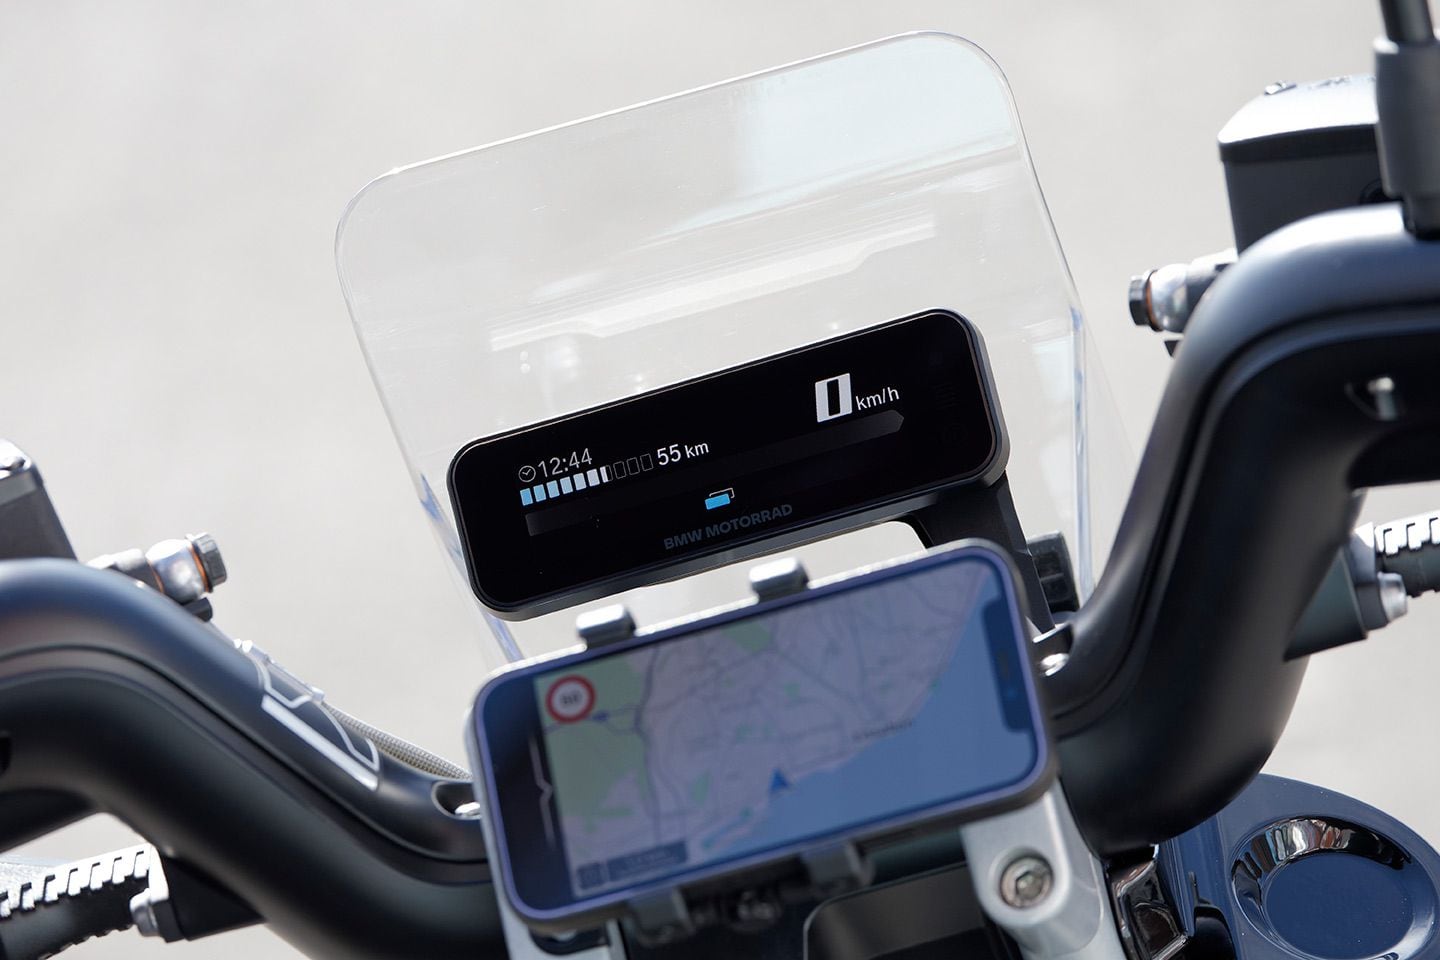 The small TFT display has basic info, but add the BMW Motorrad Connected app (standard on the Highline package, and you can navigate and get more machine info.